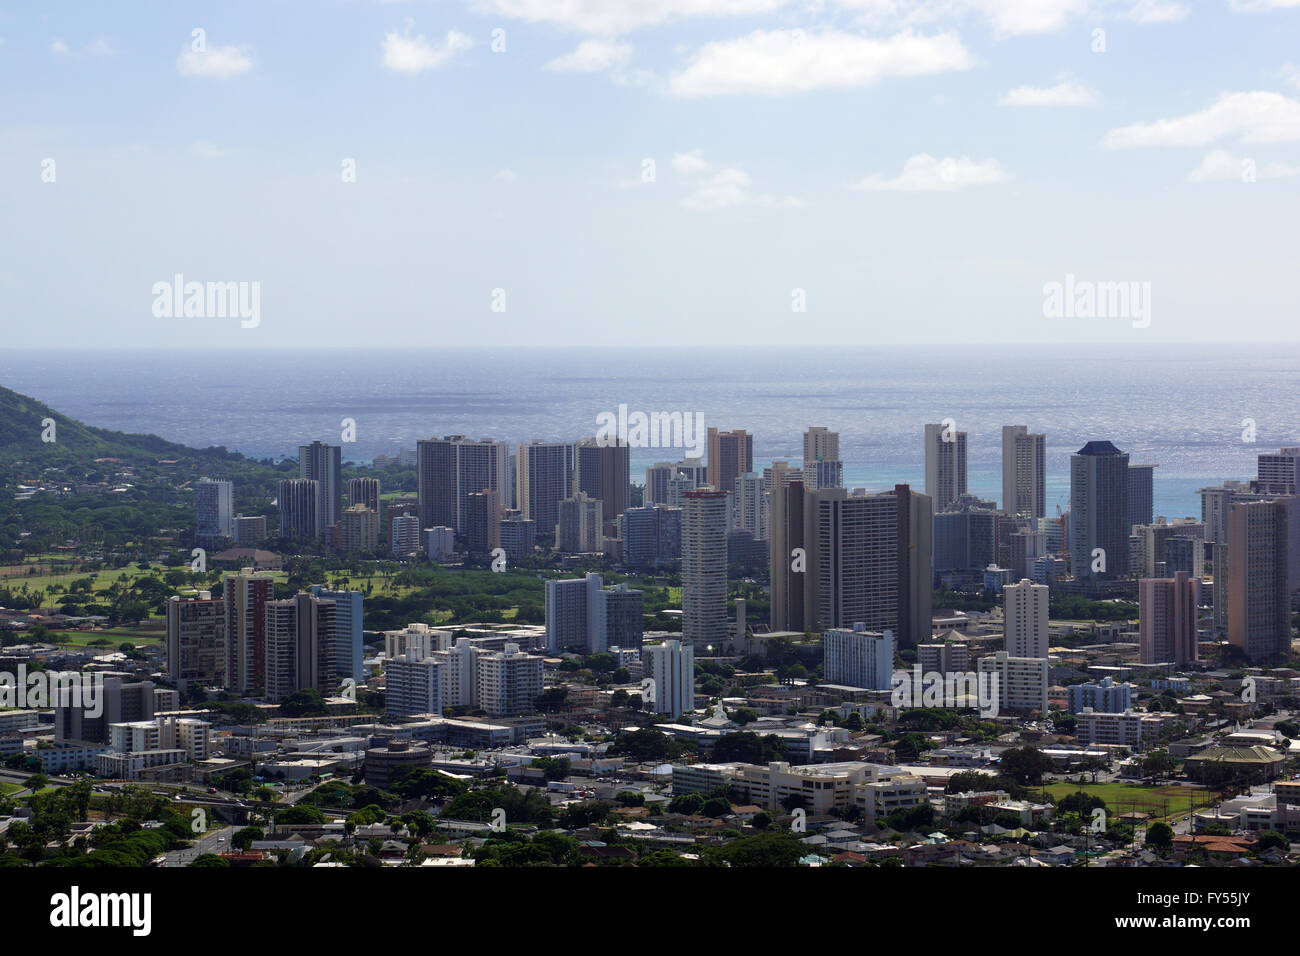 Aerial of  Honolulu, Diamond Head, Waikiki, Buildings, parks, hotels and Condos with Pacific Ocean stretching into the distance Stock Photo